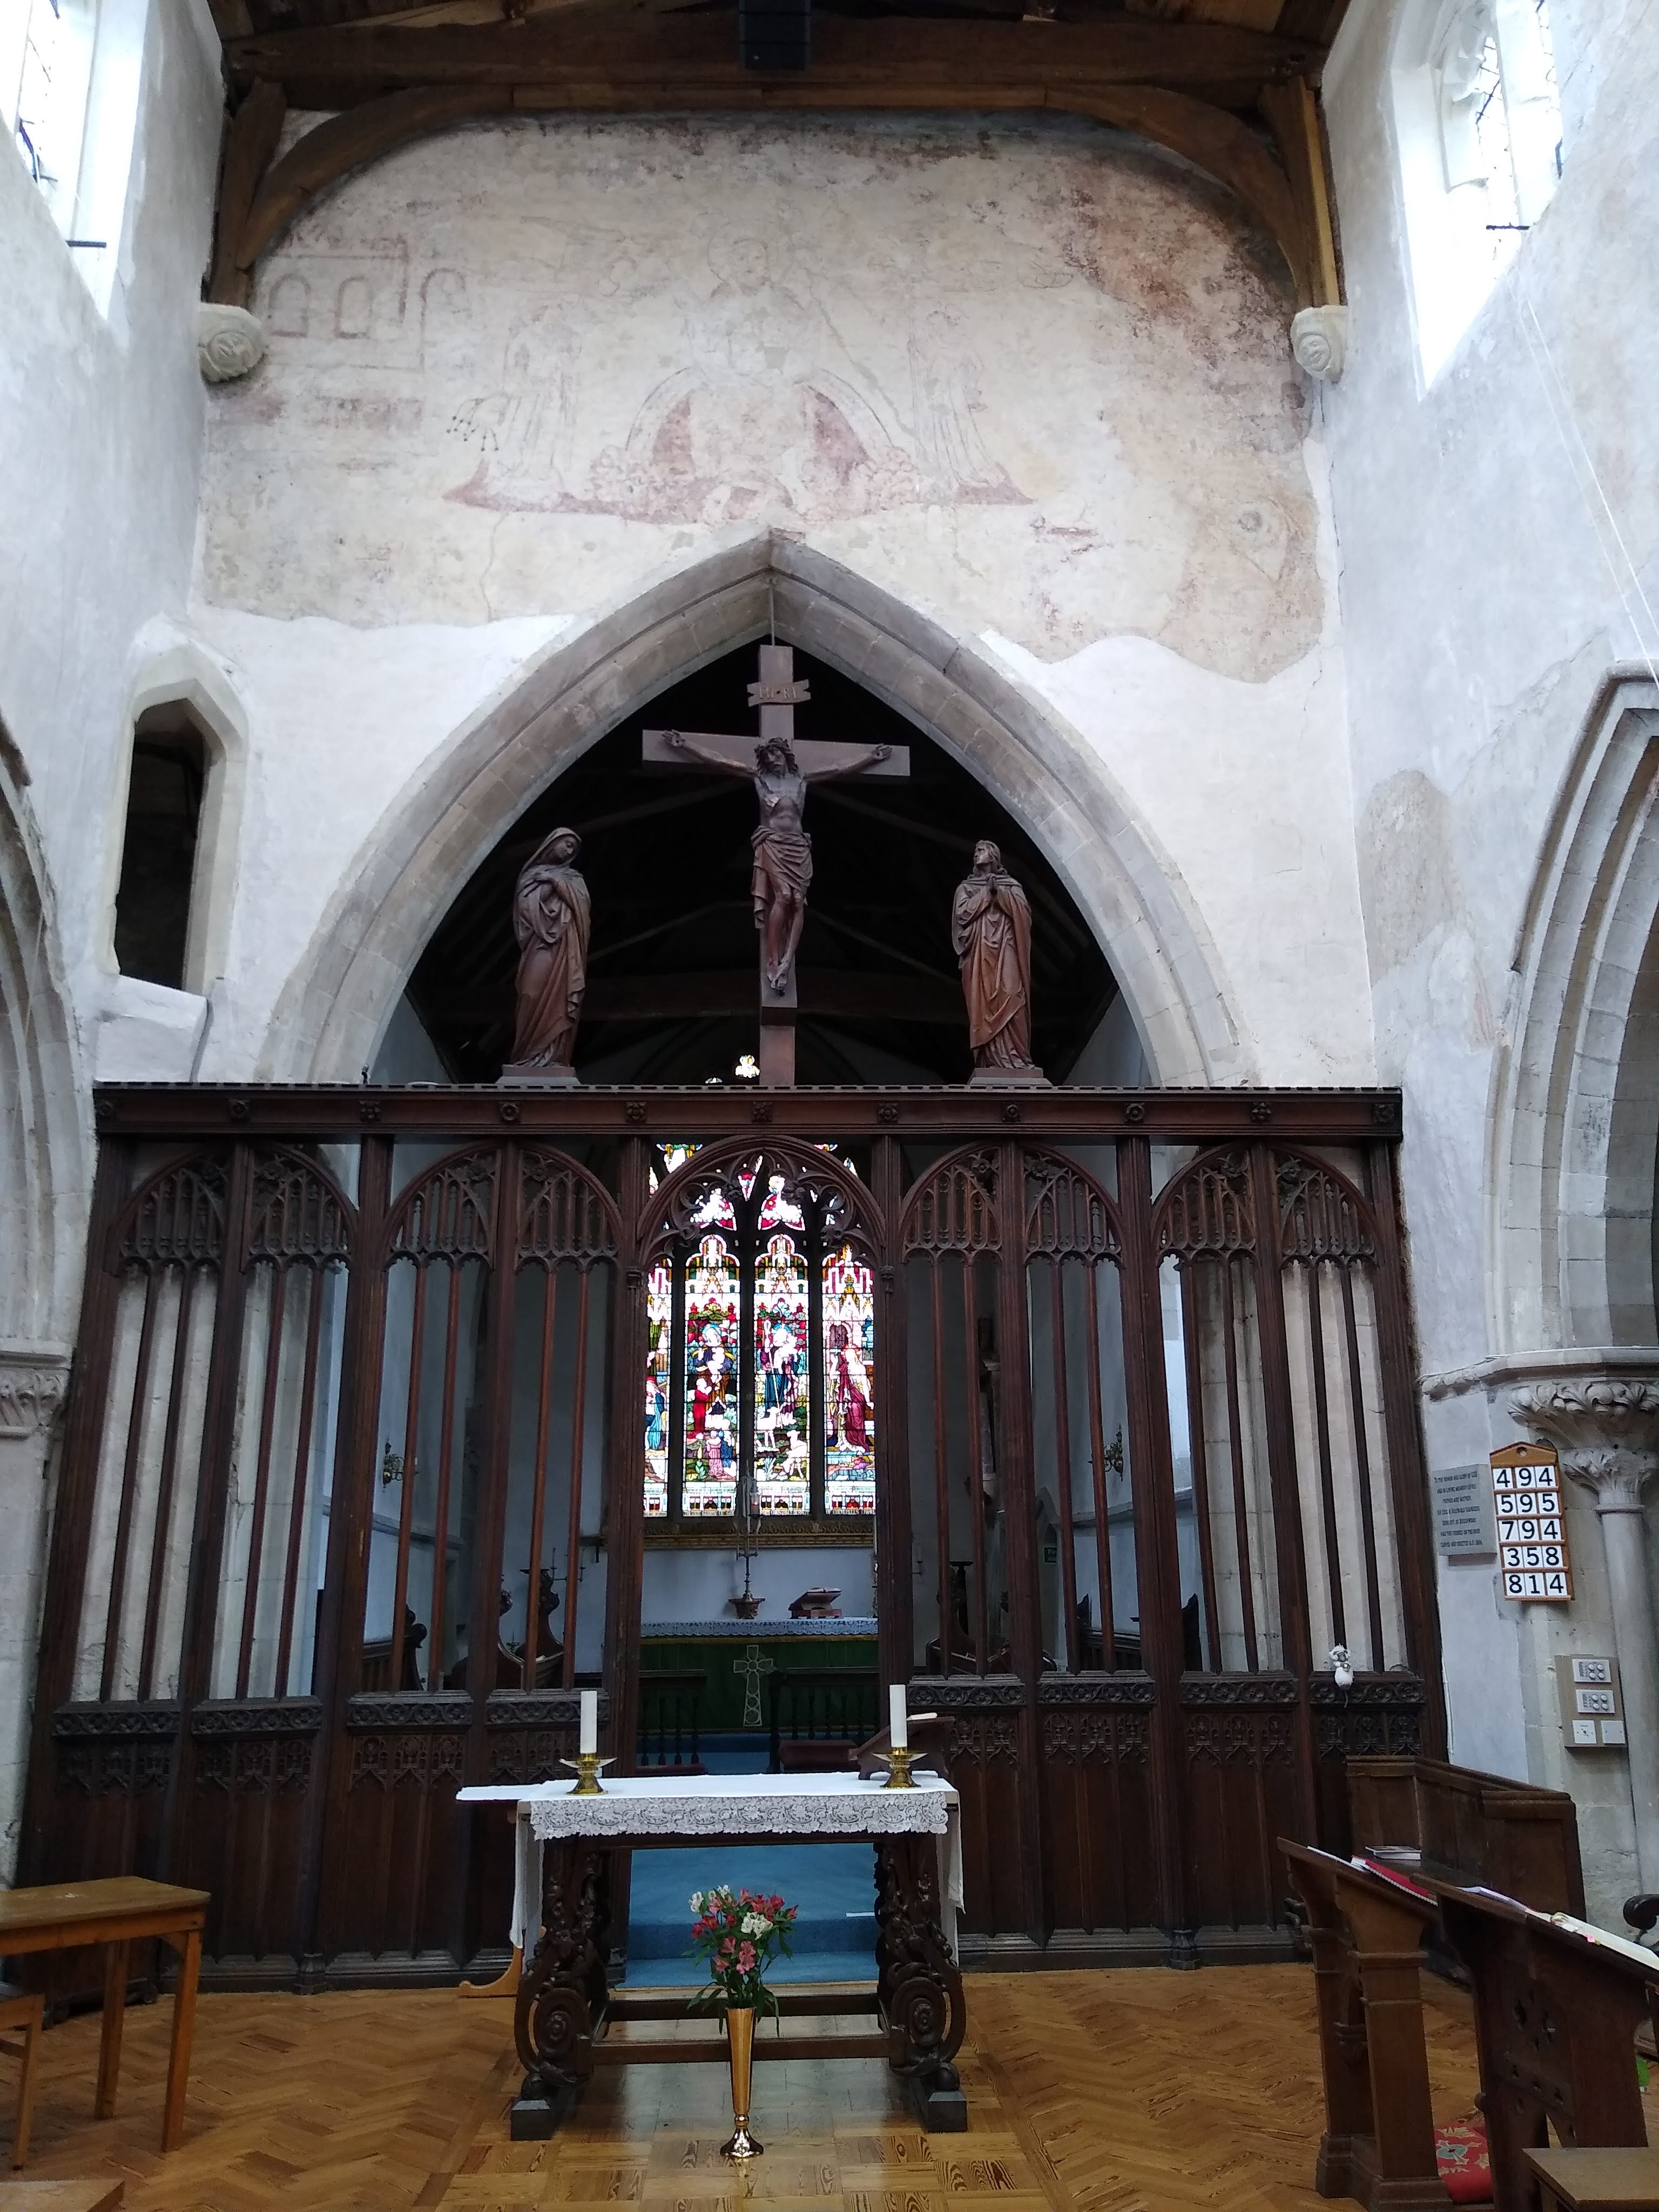 Image: Wall paintings at Flamstead